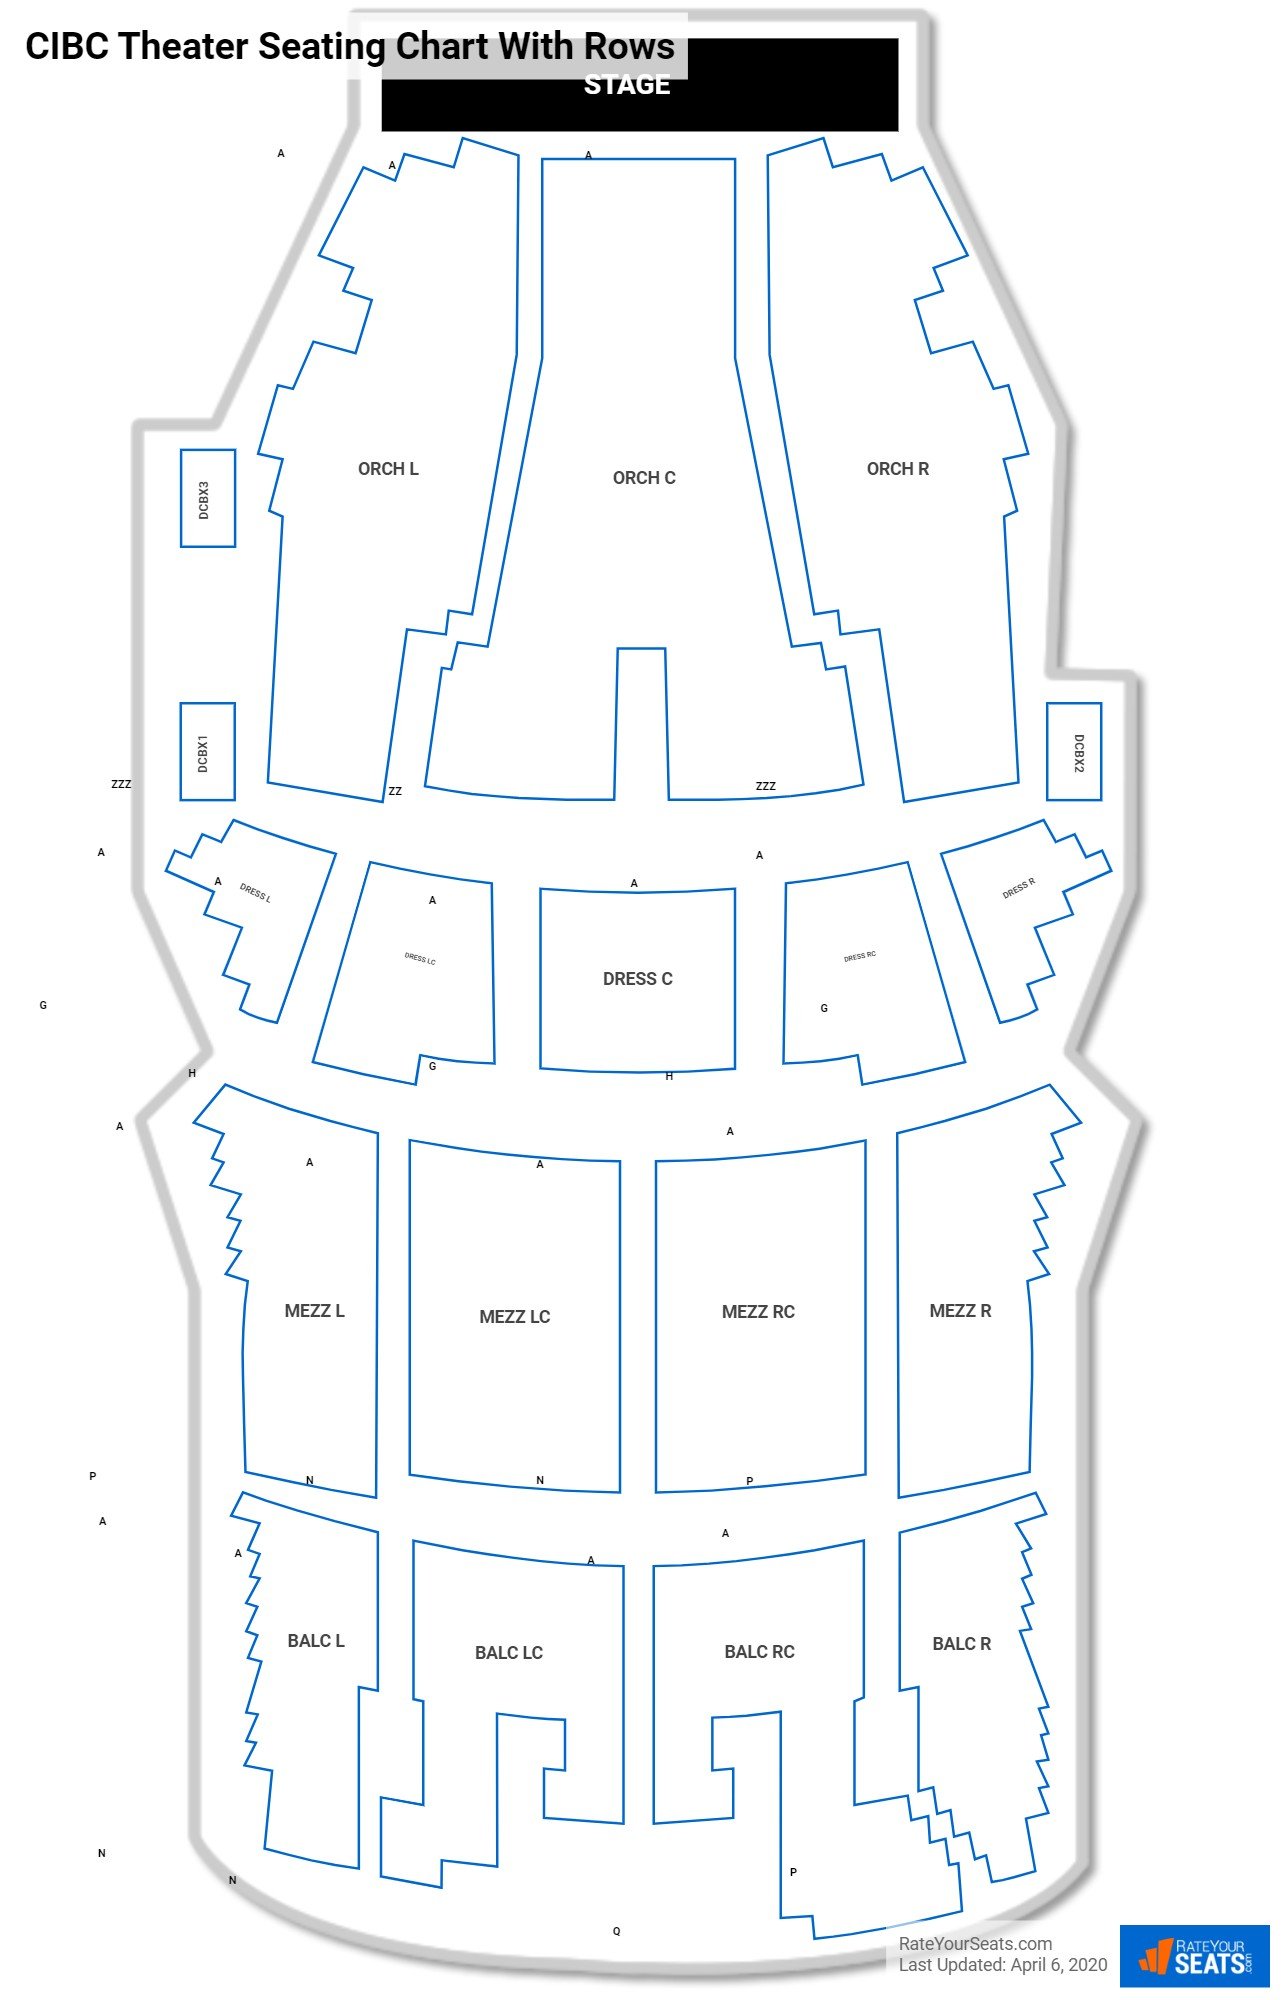 CIBC Theater seating chart with row numbers